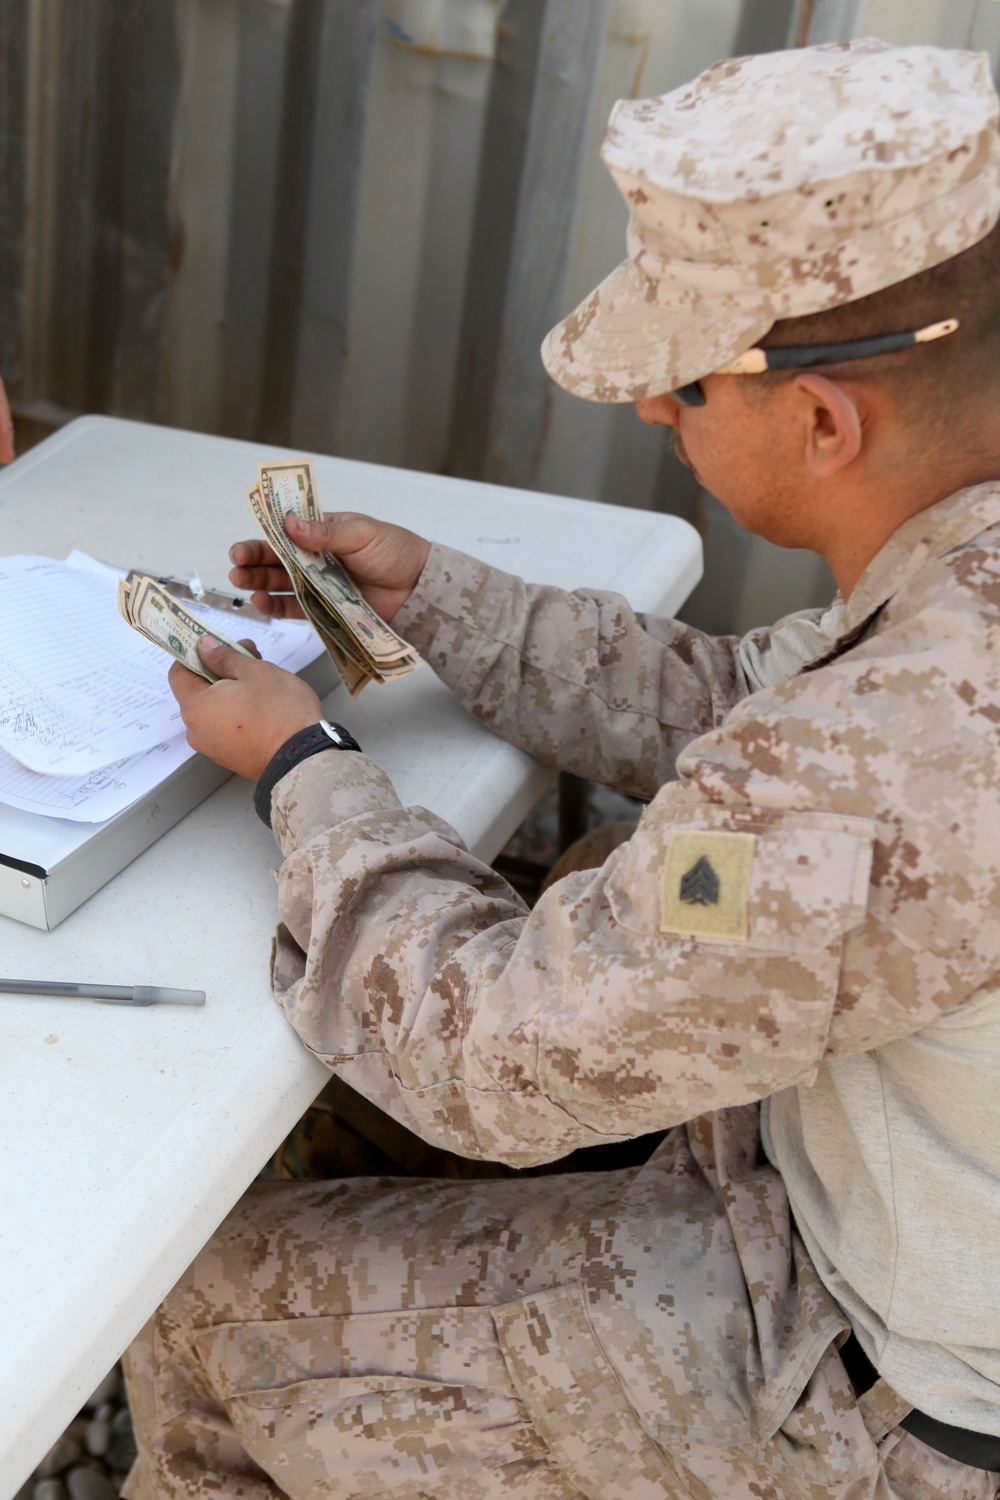 One stop morale shop: Warfighter Exchange Services Team travels throughout Helmand Province